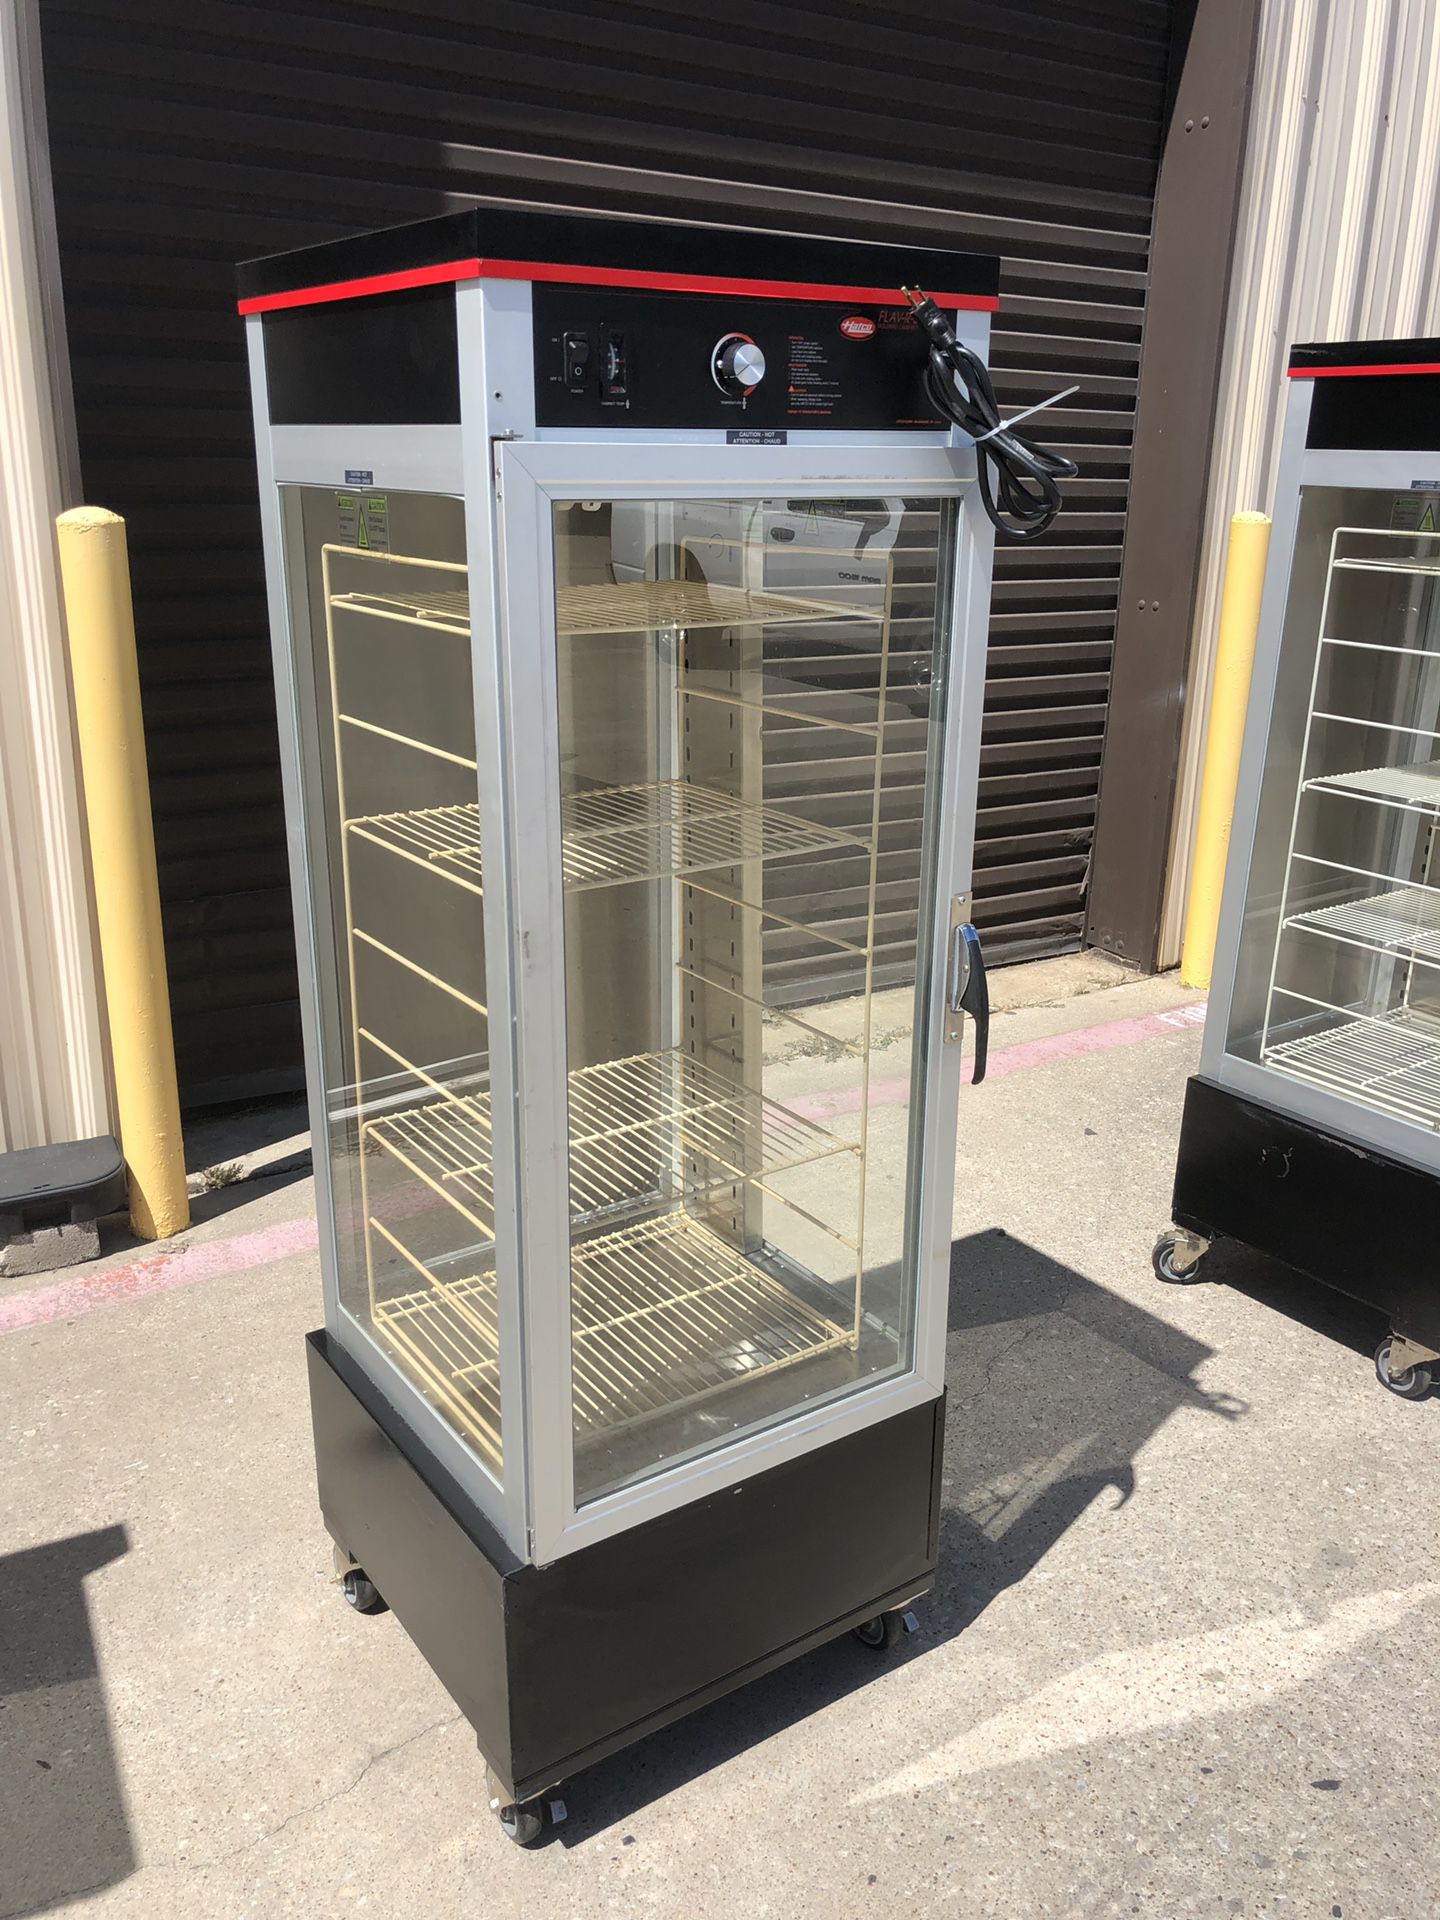 Very Nice ✨Hatco PFST-1X Electric Flav-R-Savor 8 Rack Pizza/Food Holding Cabinet - 120V, TESTED❗️